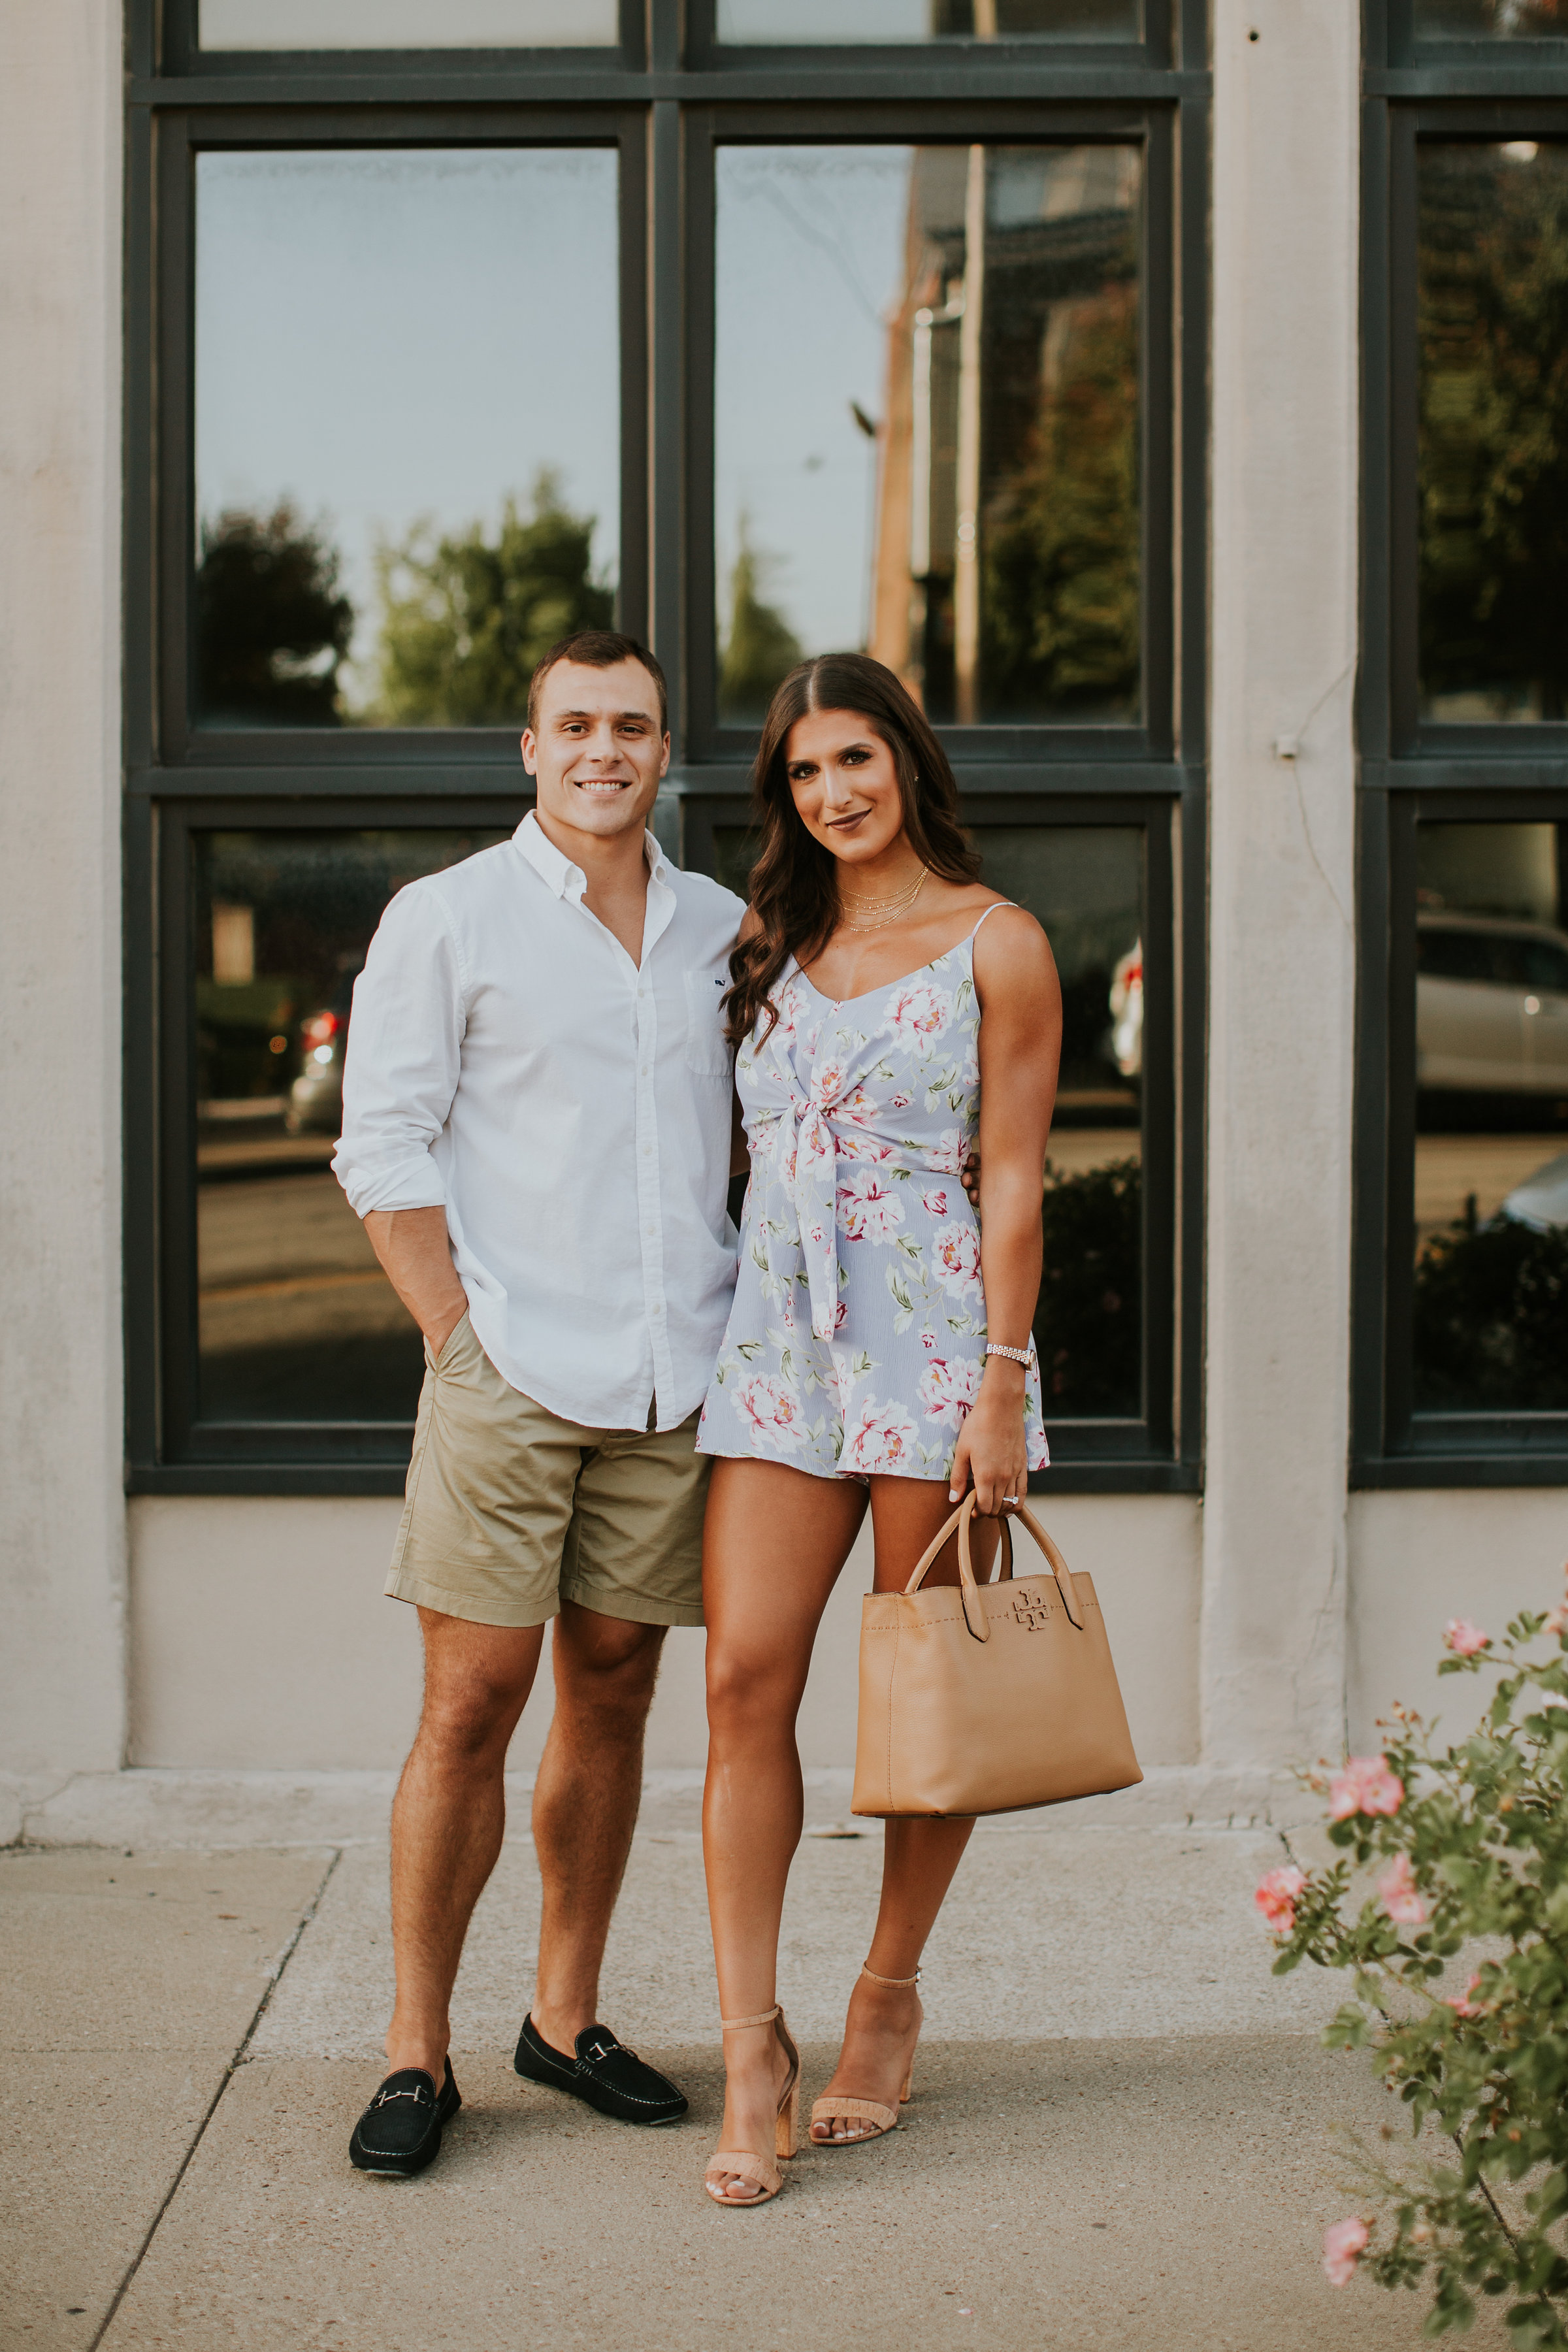 lilac floral romper, couples session, mens style, mens fashion, summer men fashion, couples style, couples goals, grace wainwright wedding, a southern drawl engagement session, our engagement session, grace wainwright engagement, a southern drawl wedding, grace white engagement, grace white wedding, jordan white engagement, jordan white louisville, jordan white wedding, a southern drawl wedding update, grace wainwright husband, grace wainwright fiance, erin trimble photography, couples shoot, couples engagement session, fall wedding // grace wainwright a southern drawl